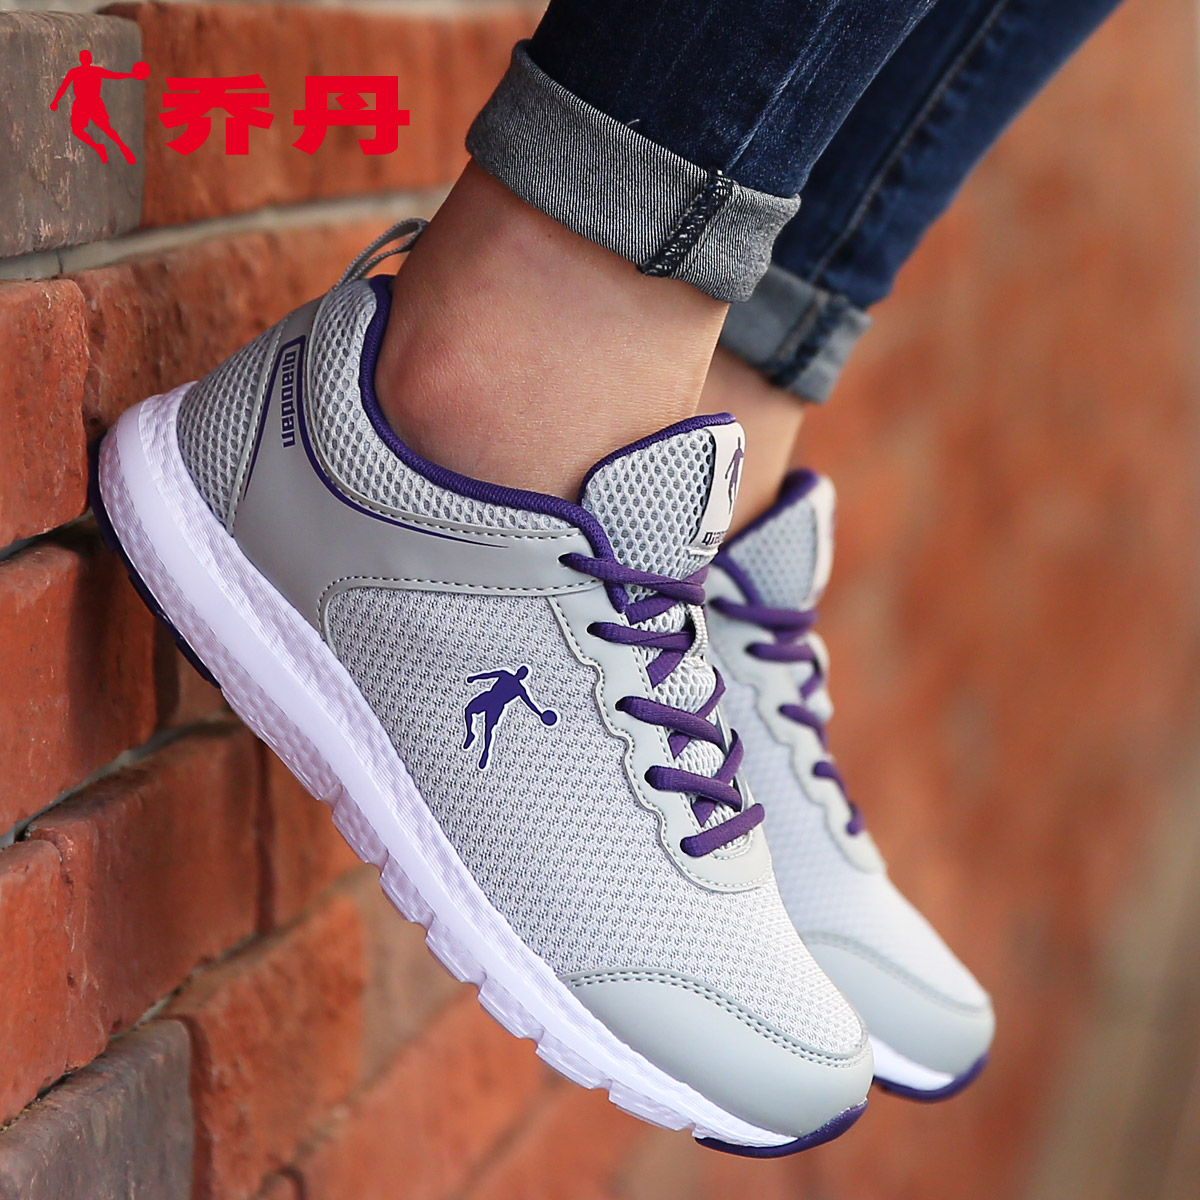 Jordan Summer Running Shoe Trend Lightweight and Breathable Casual Shoes Shock Absorbing and Durable Couple Shoes for Men and Women Jogging Shoes